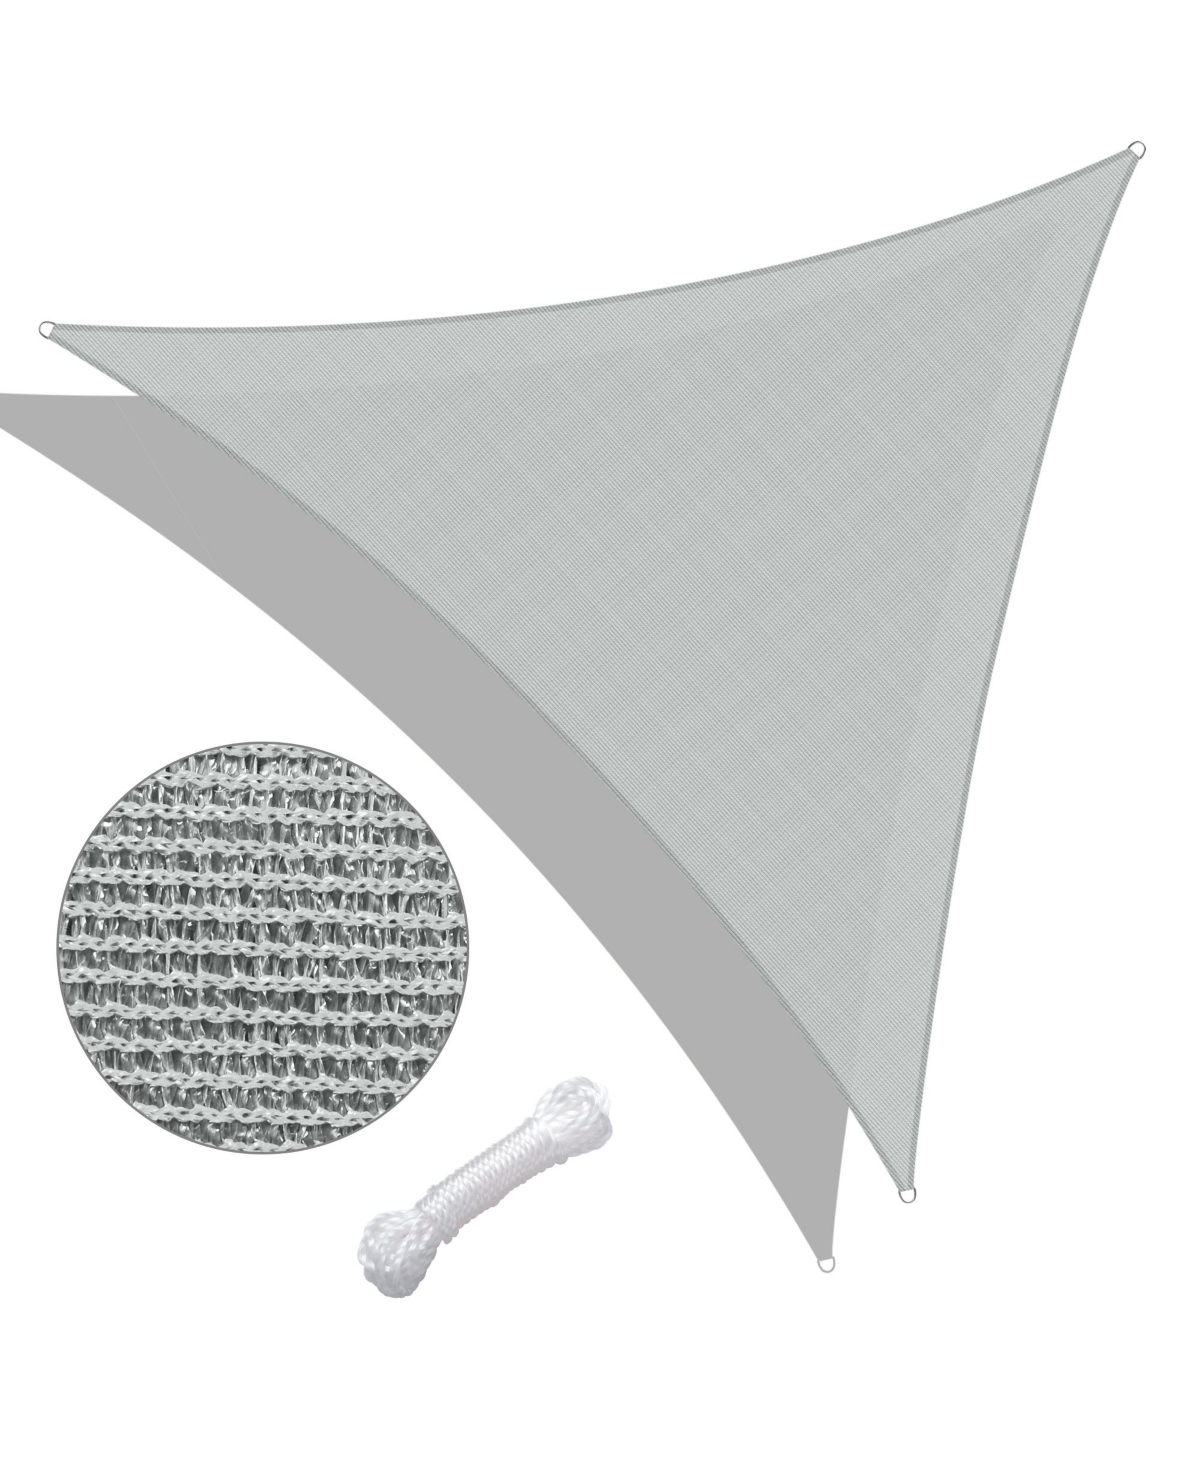 25 Ft 97% Uv Block Triangle Sun Shade Sail Canopy Cover Net for Patio Poolside - Gray